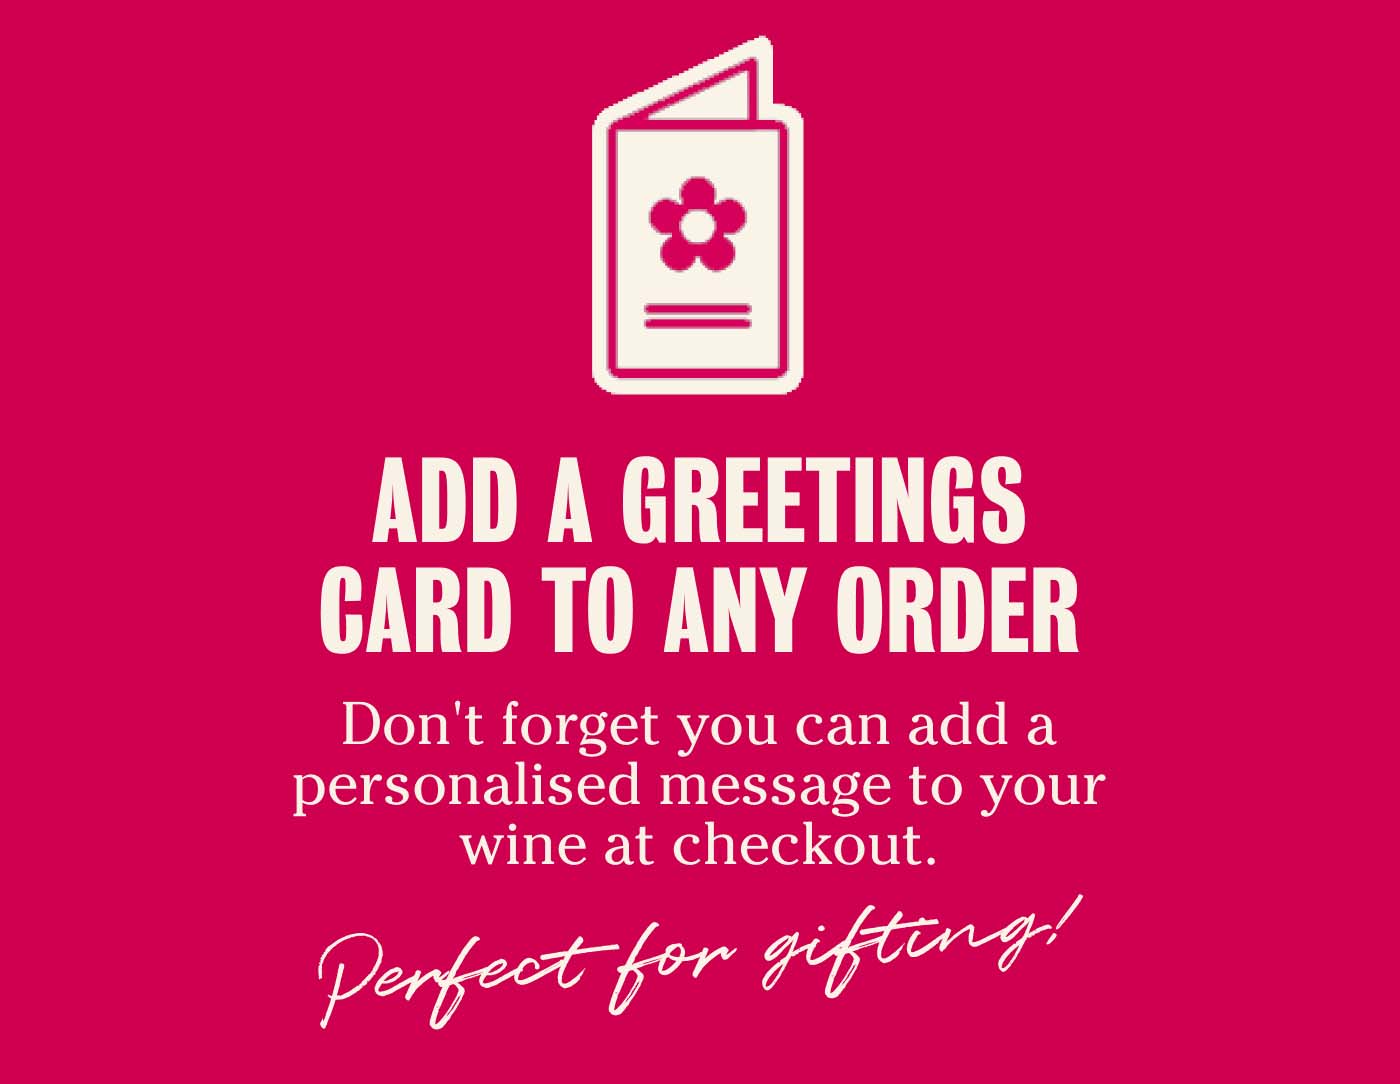 Add a greeting card to any order - perfect for gifting